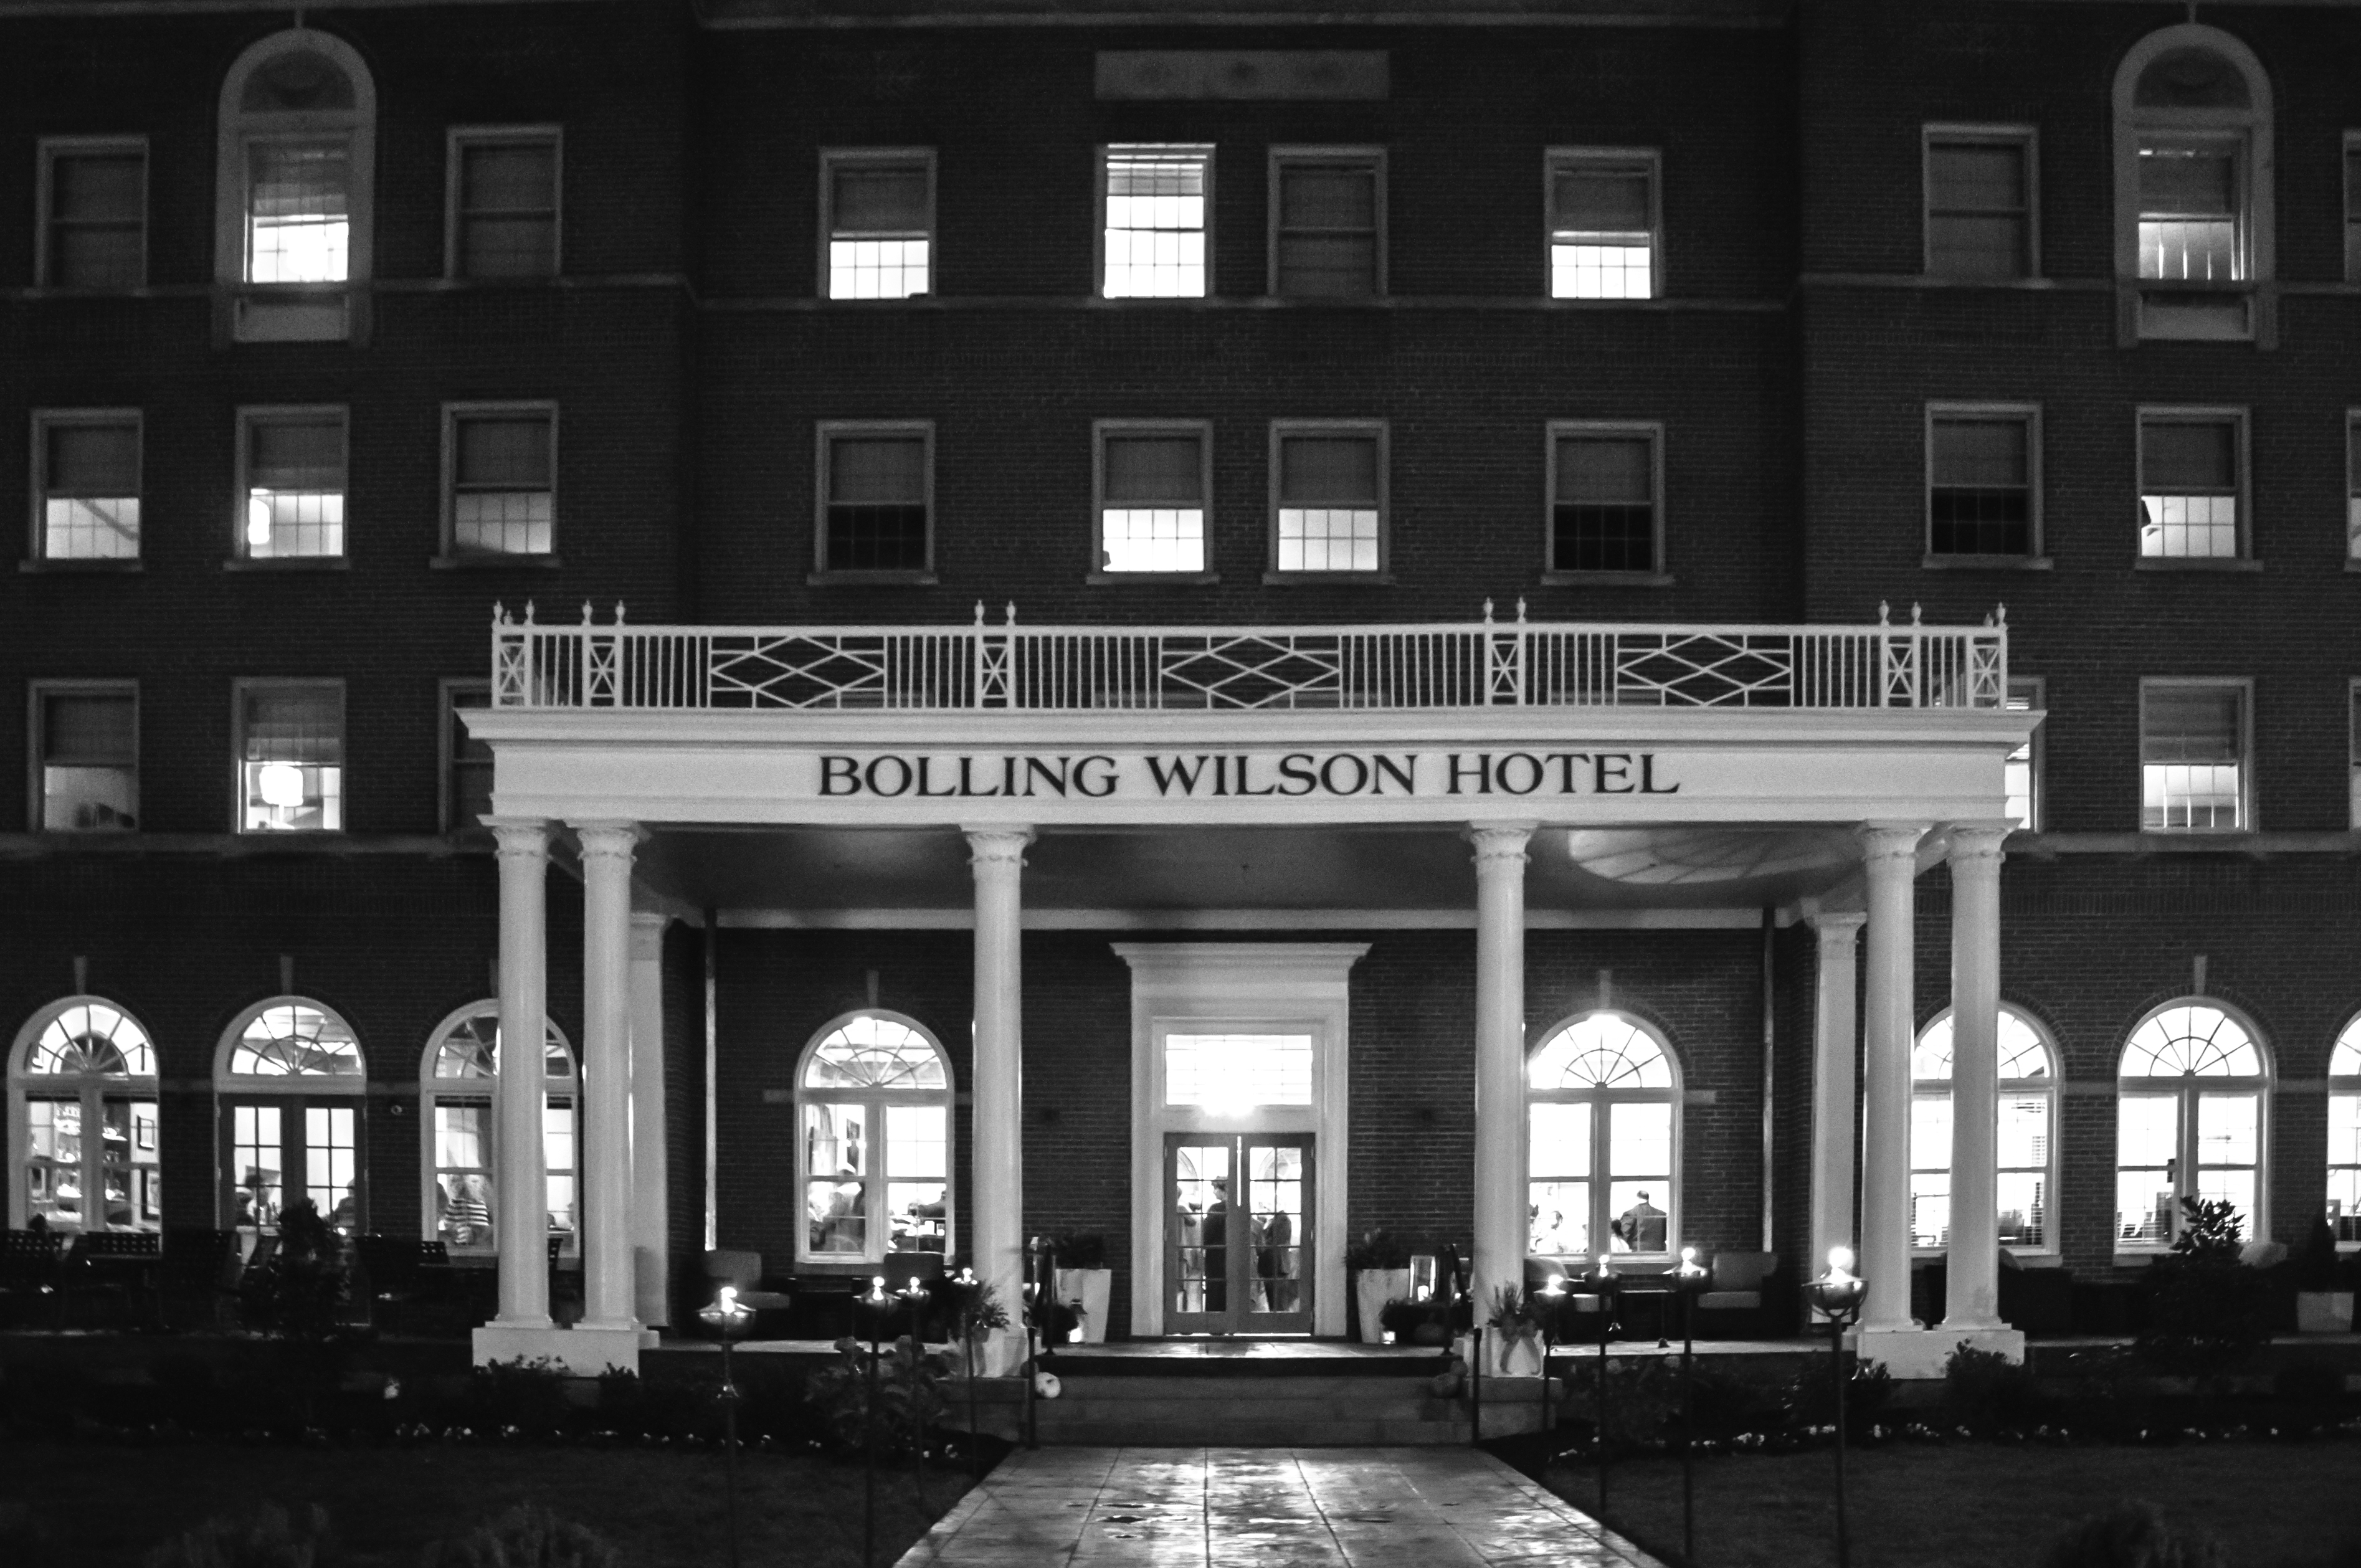 The Bolling Wilson Hotel